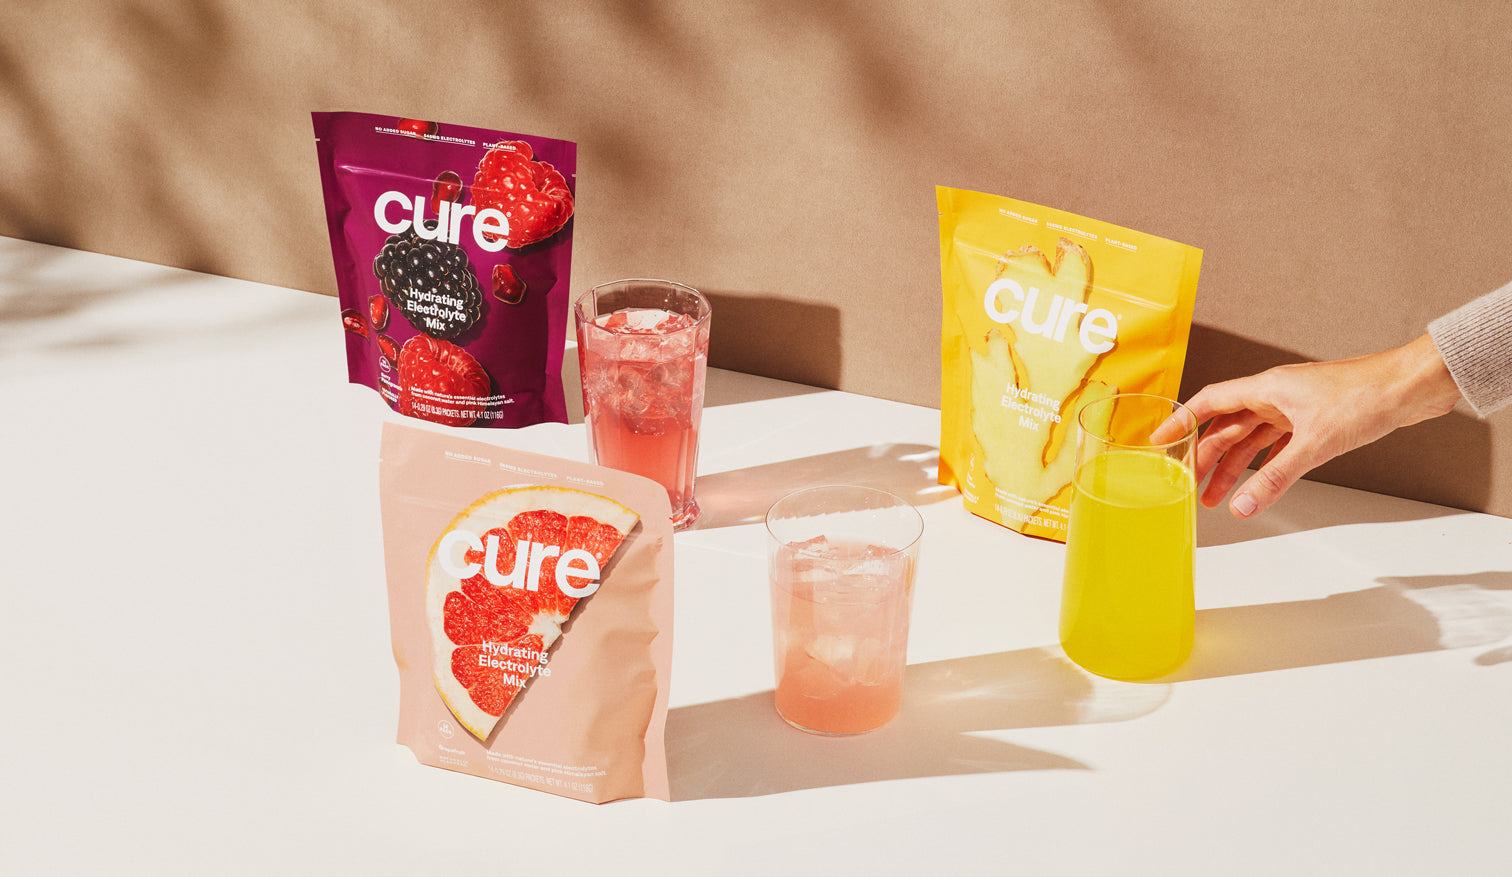 Hand reaching for a 'Cure' ginger electrolyte drink among various flavors.